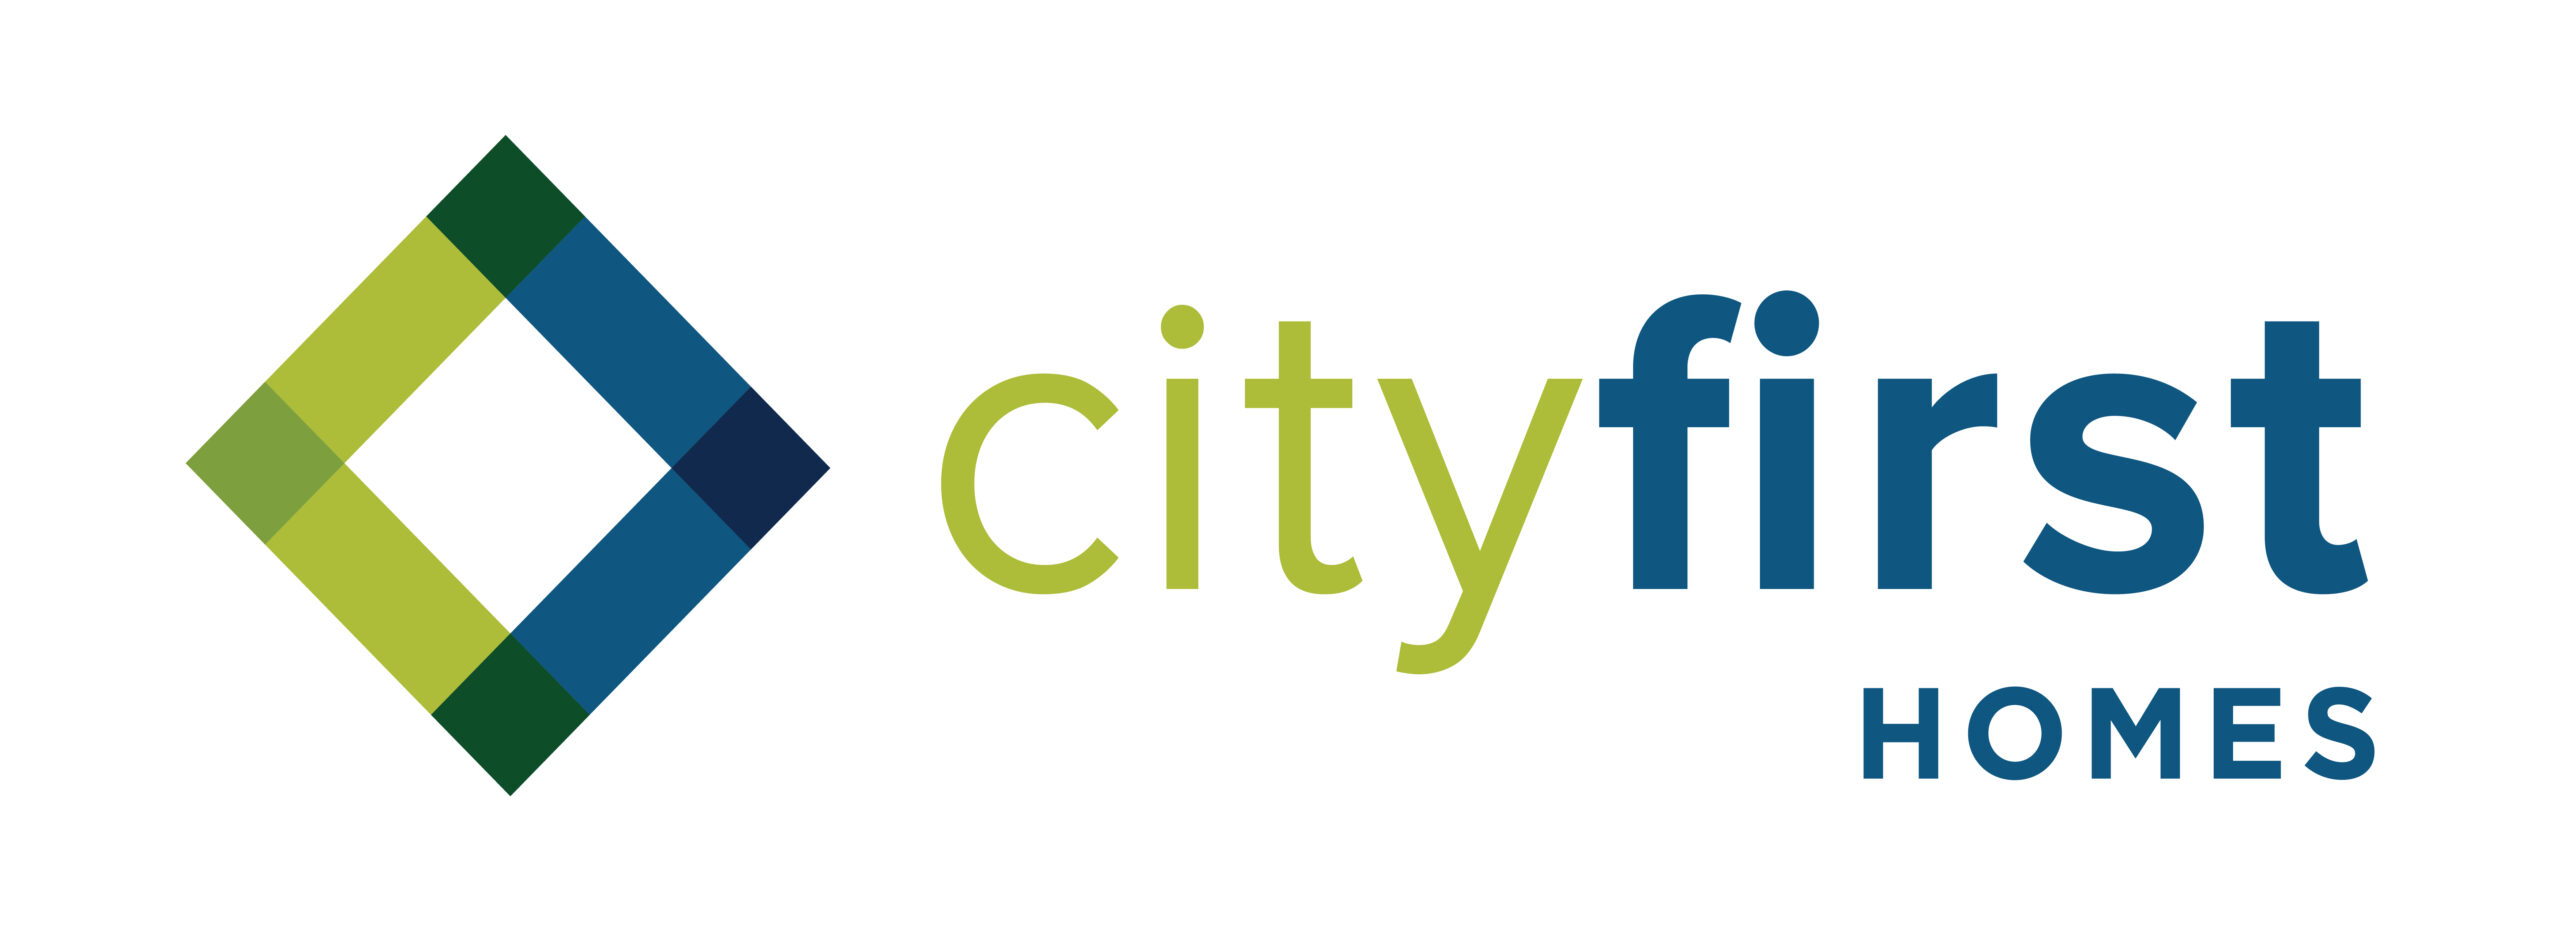 City First Homes logo